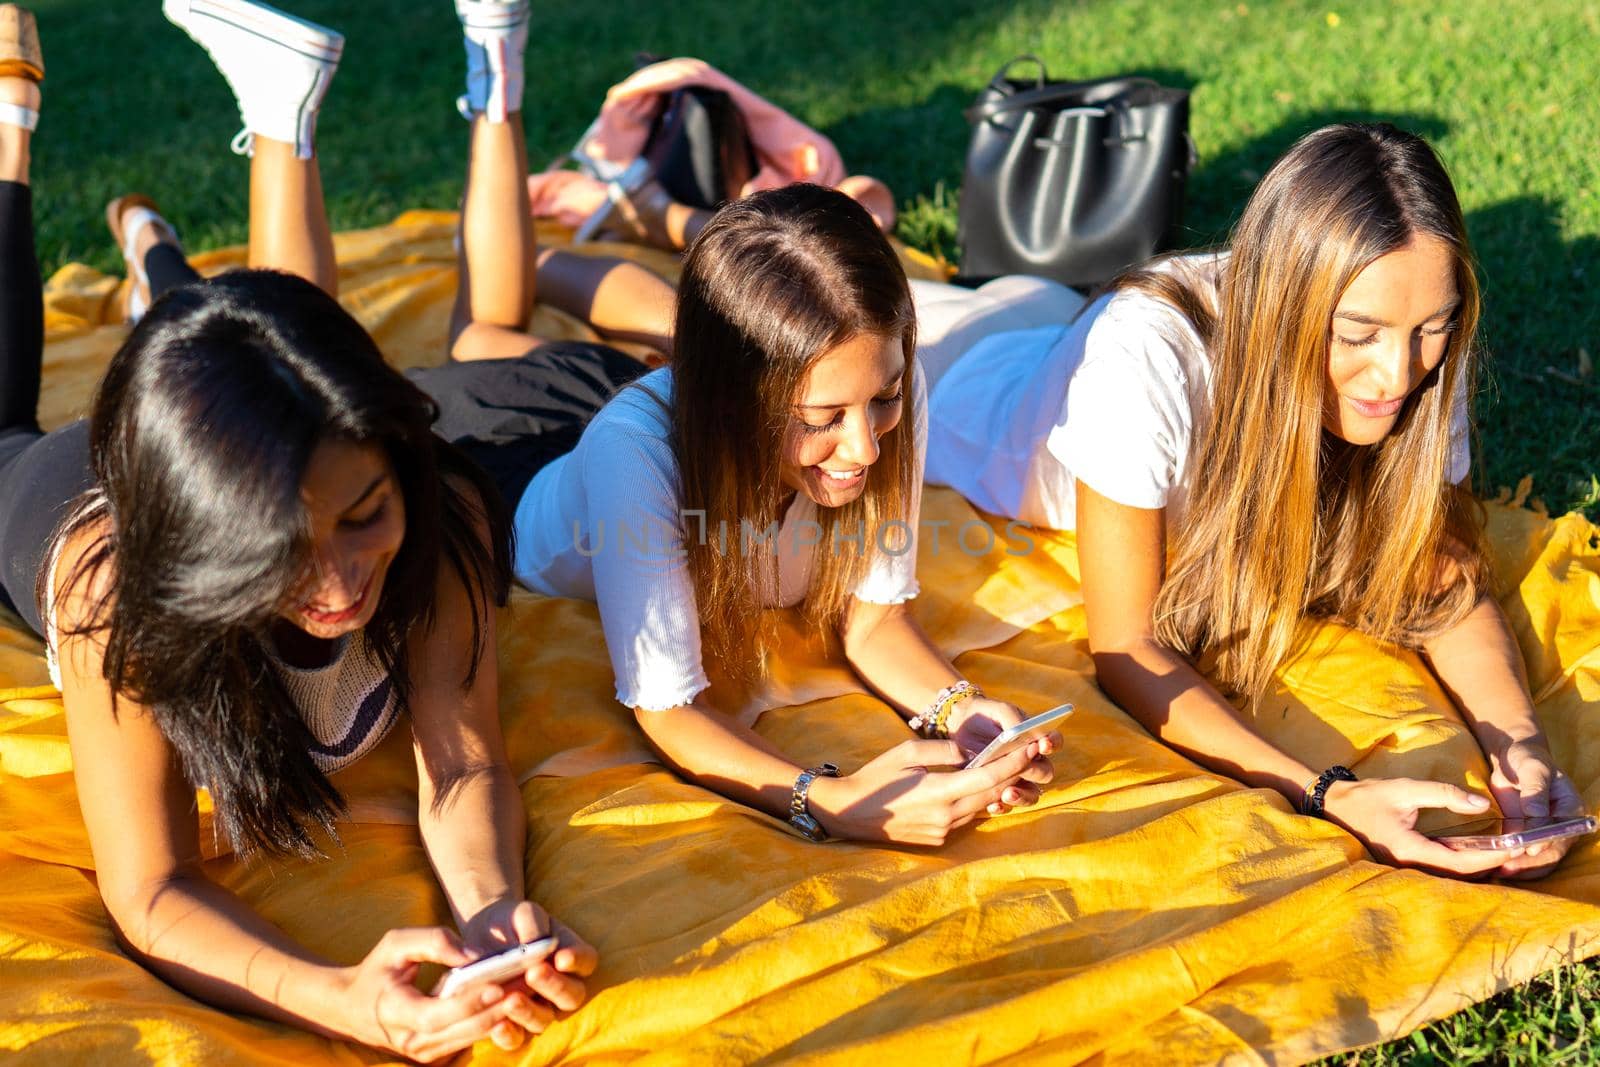 Three young best beautiful friends spending time in social network together lying on grass meadow in city park at sunset or dawn. Girls having fun with smartphone using internet mobile technology by robbyfontanesi